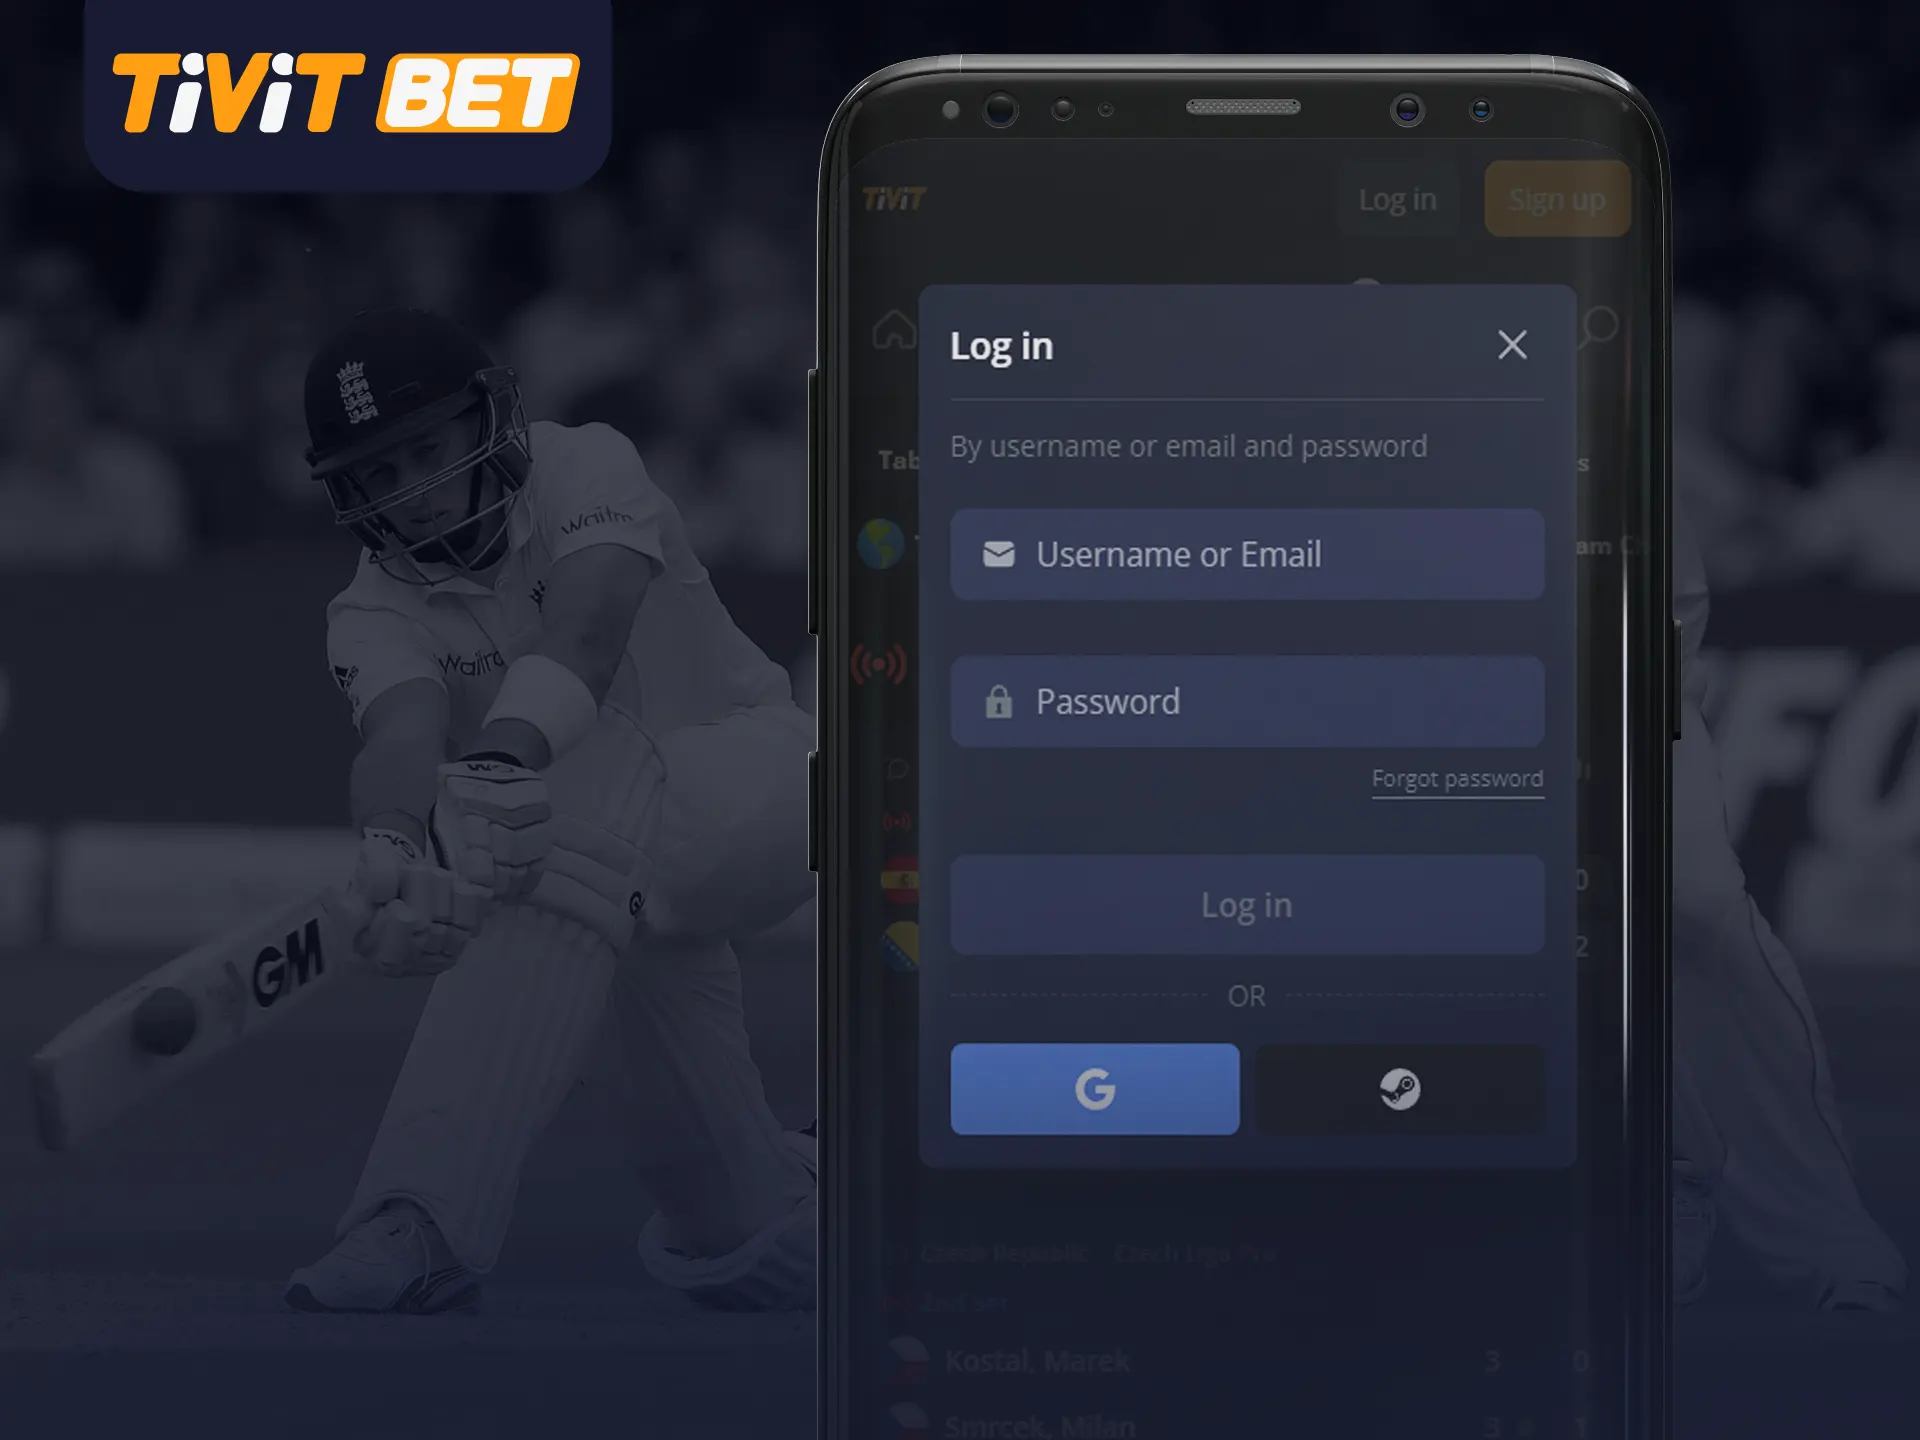 You can log in to the Tivit bet app via your phone using your login and password.